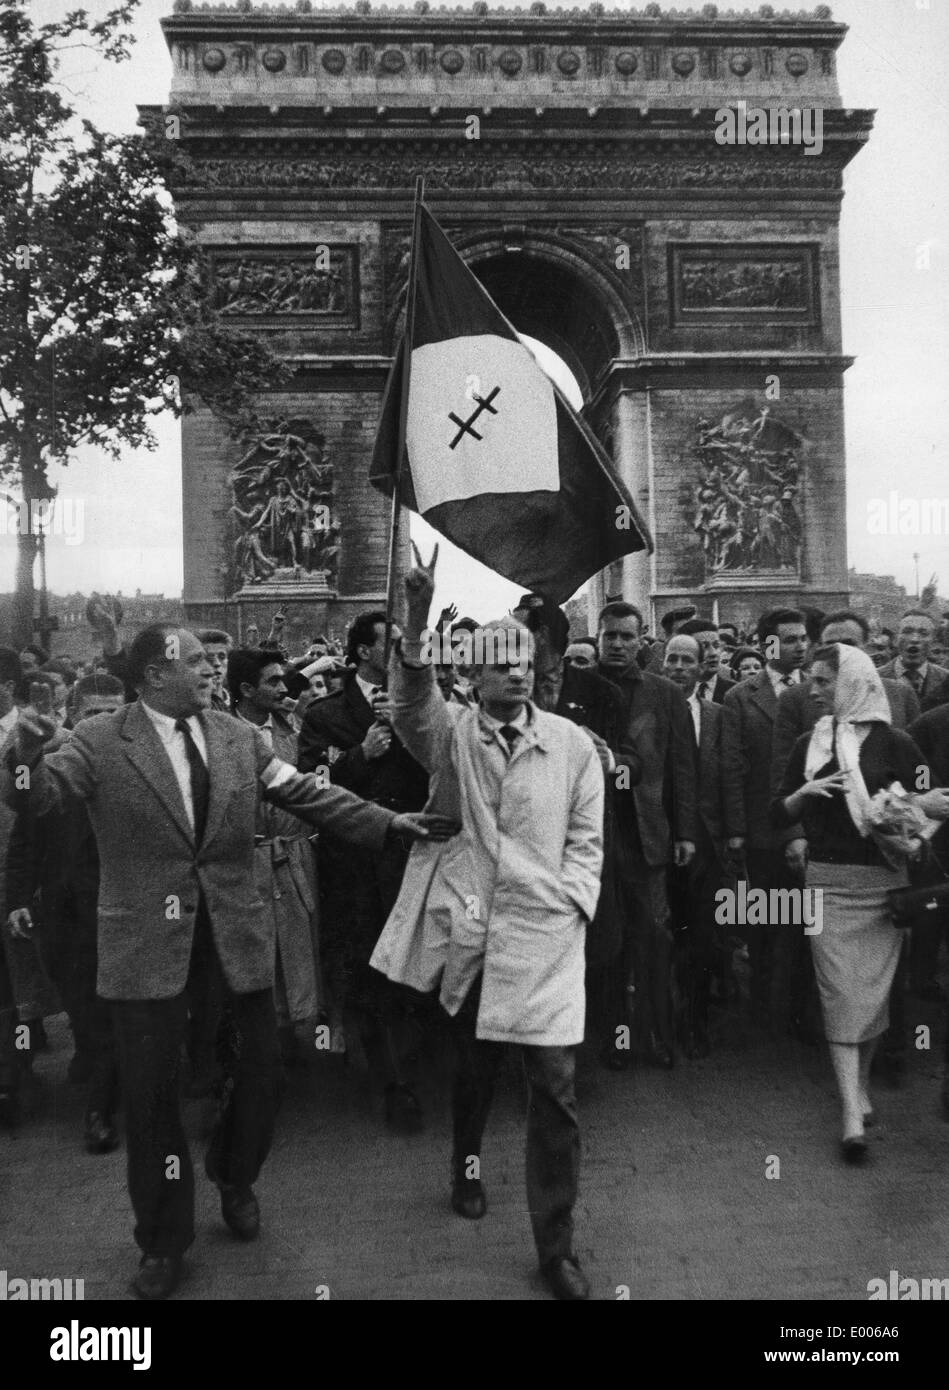 Demonstration of de Gaulle supporters, 1958 Stock Photo